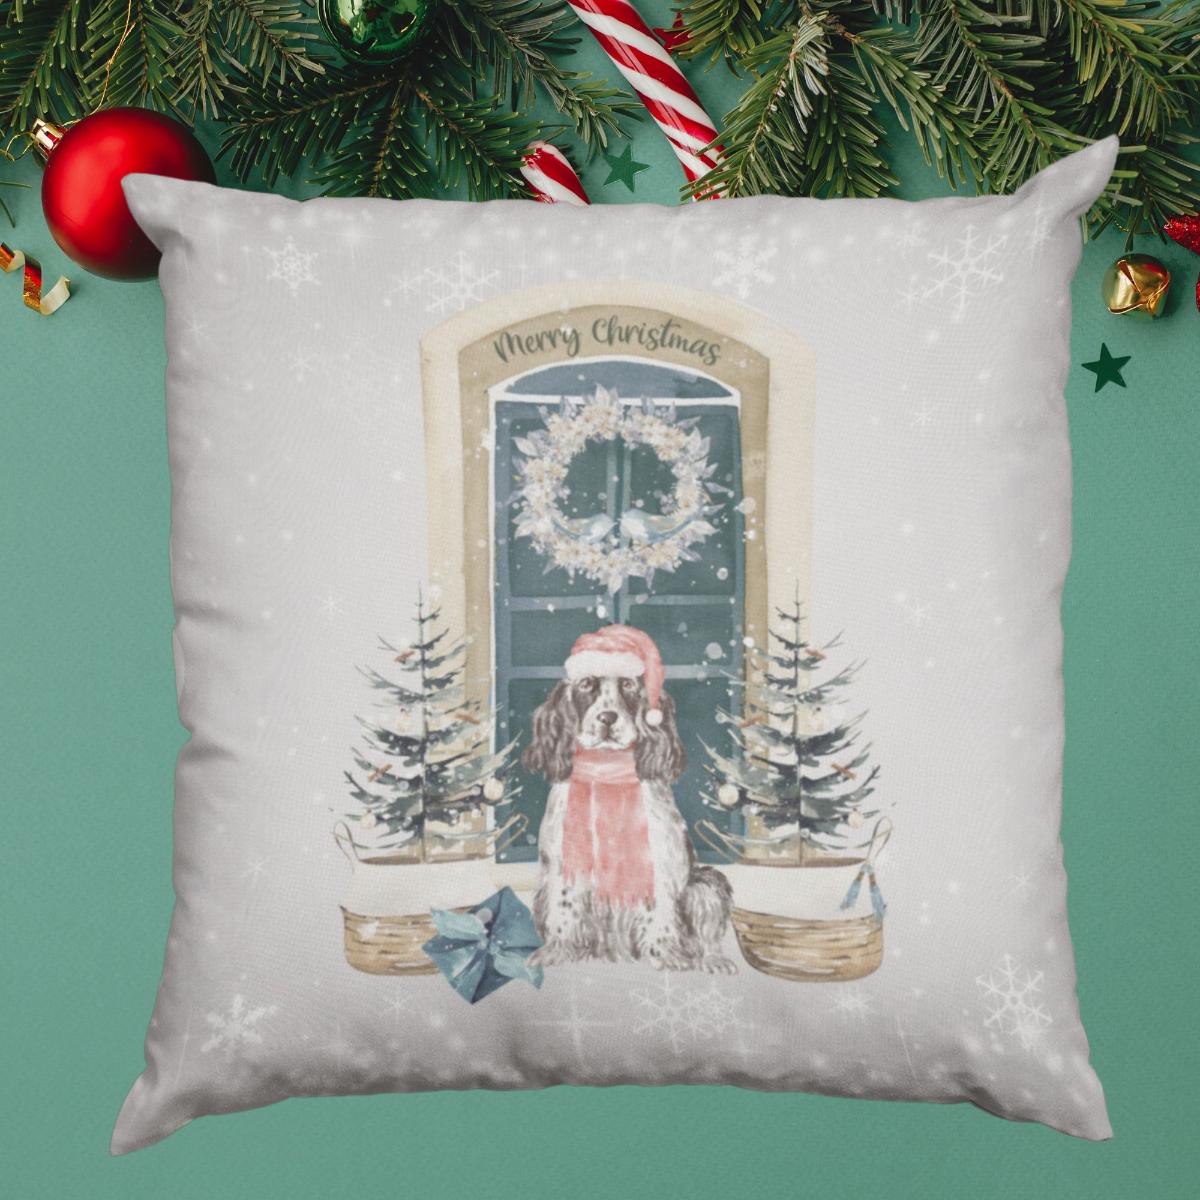 Christmas Cushion Decorative Gift Pillow - Sweetie